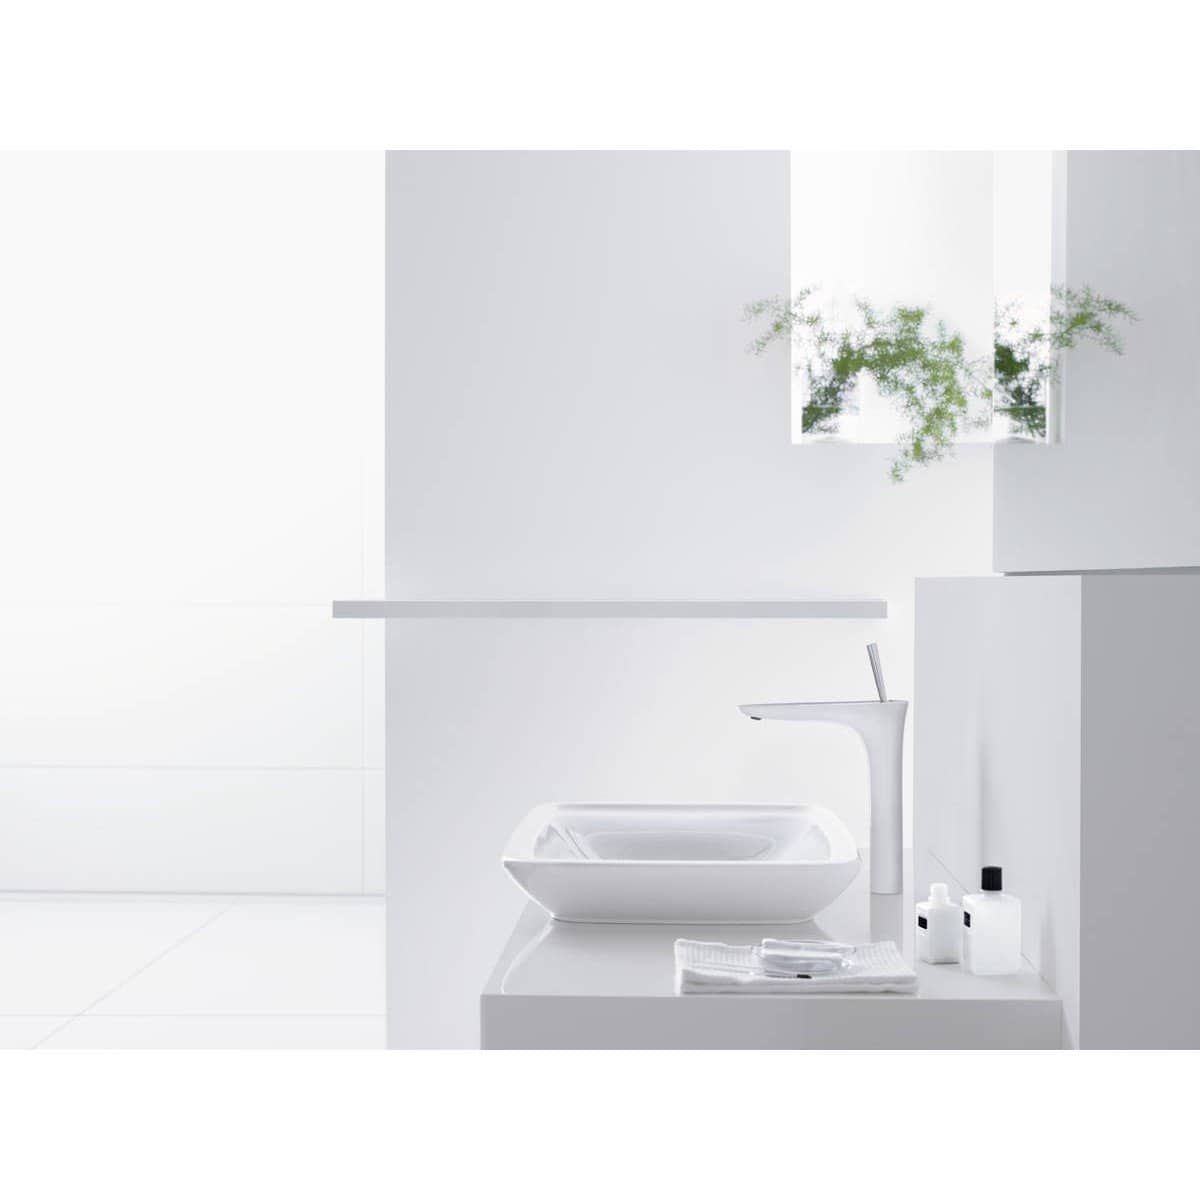 PuraVida 浴室單把手面盆龍頭 240帶按壓落水 Bathroom Single Lever Basin Mixer 240 For Washbowls With Push-open Waste Set-hansgrohe-Home Manner